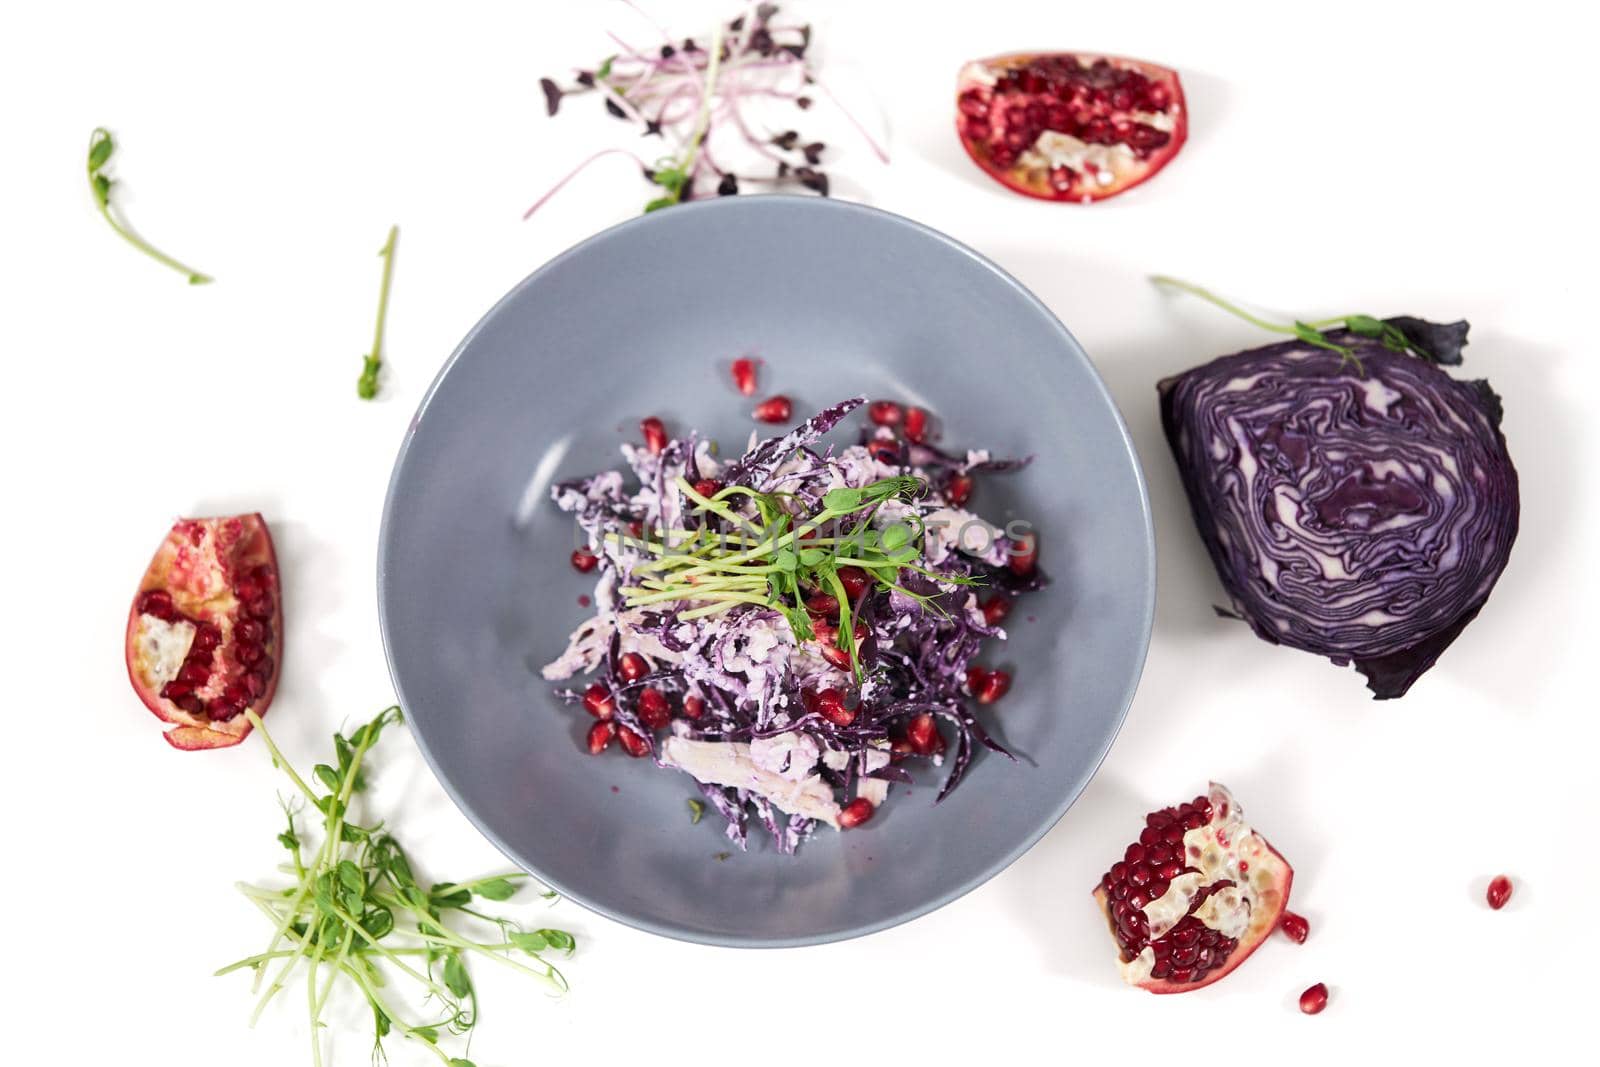  Beautiful plate with delicious purple cabbage salad. by SerhiiBobyk